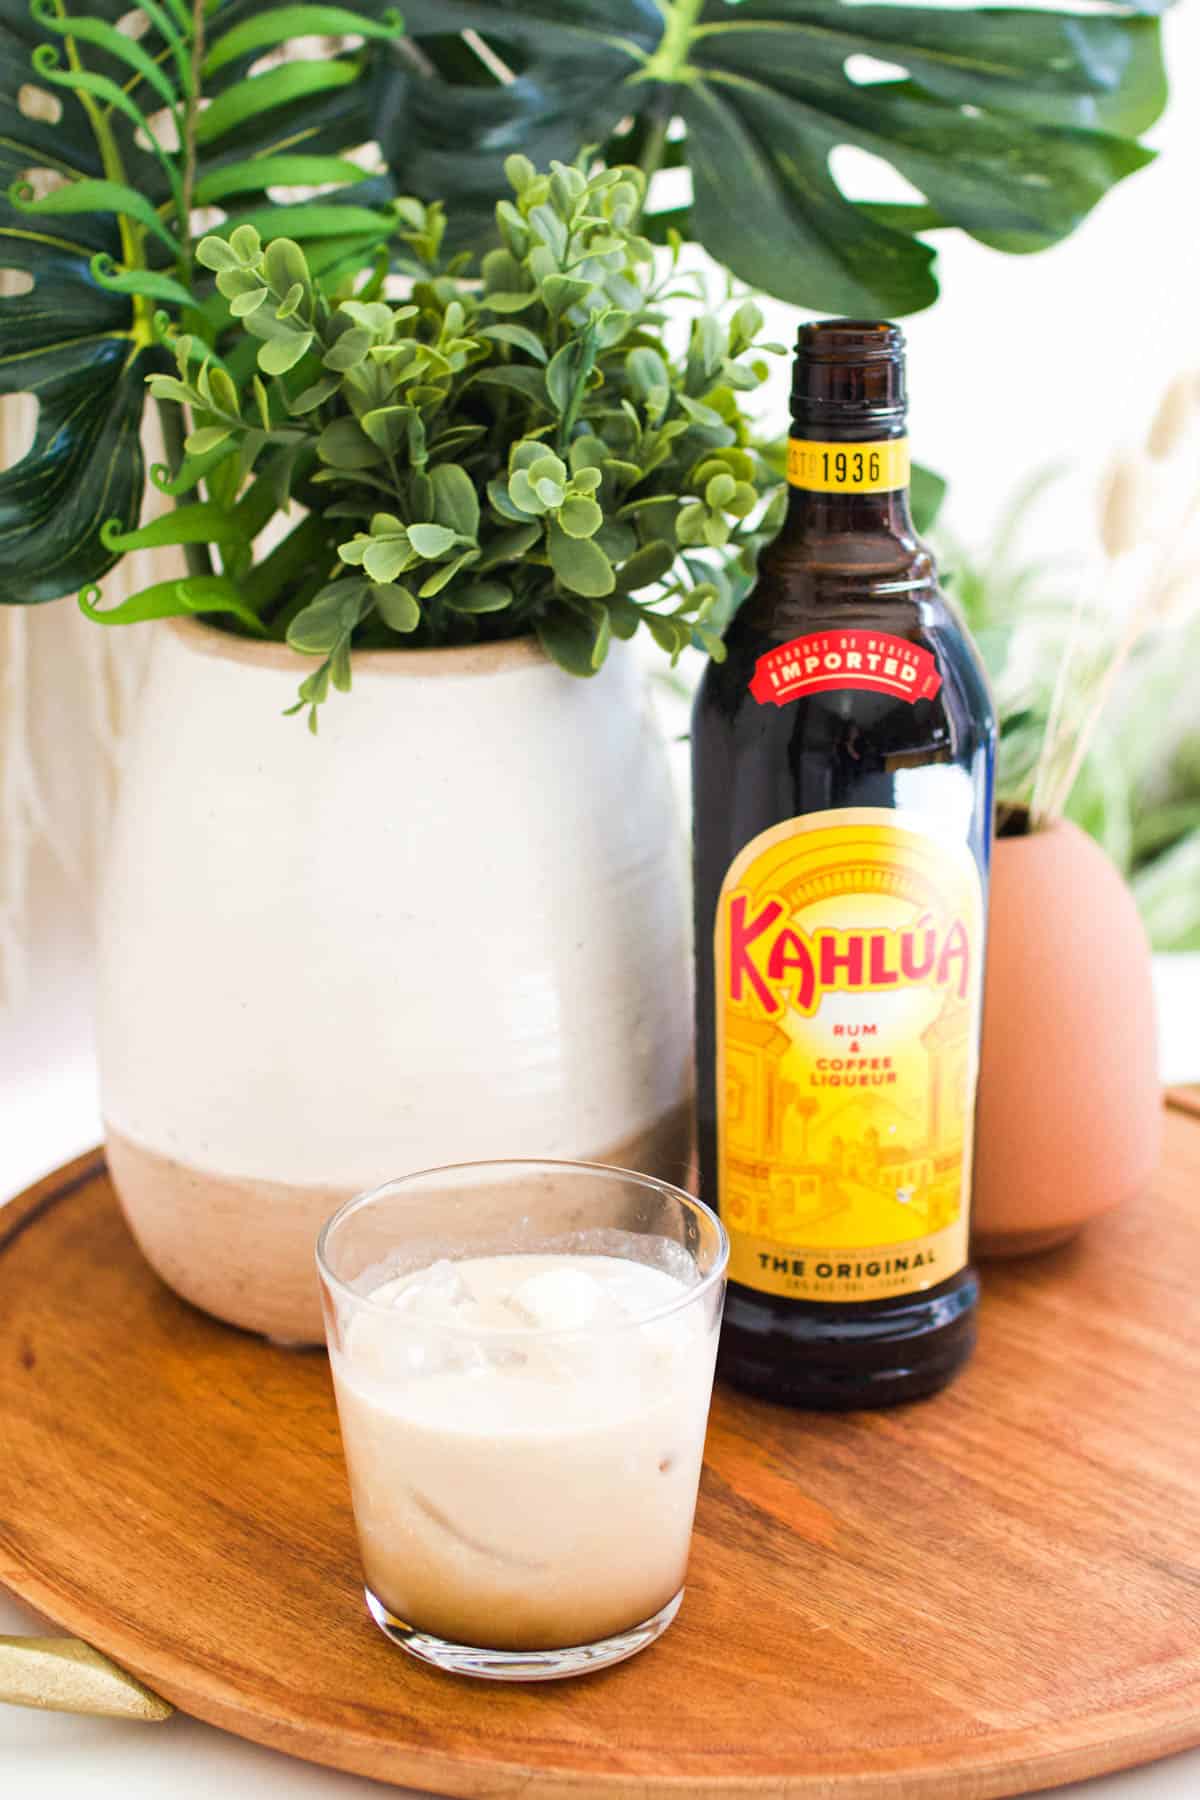 A classic White Russian cocktail on a tray with Kahlua.